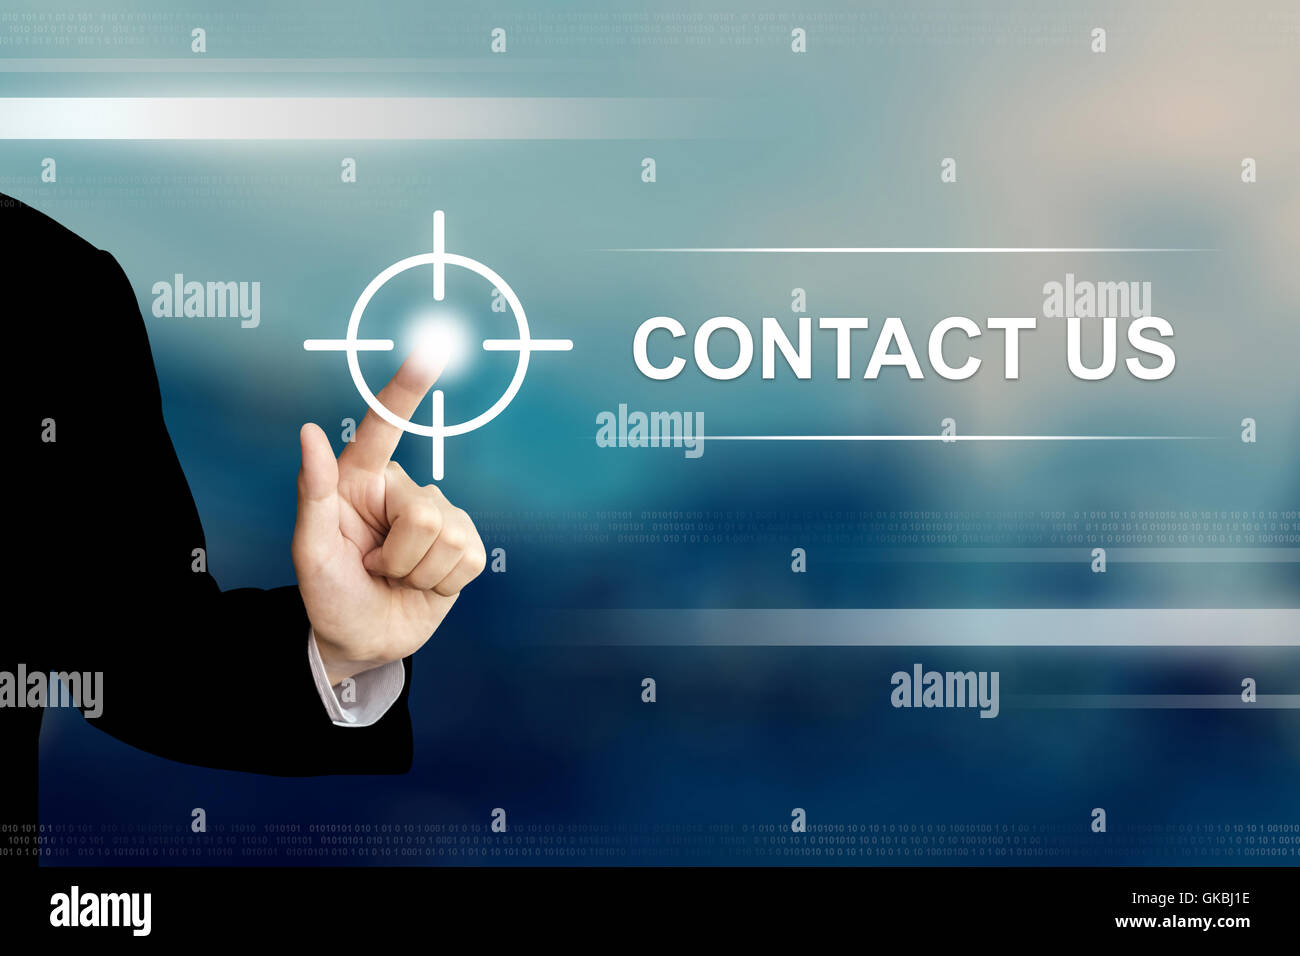 business hand pushing contact us button on a touch screen interface Stock Photo